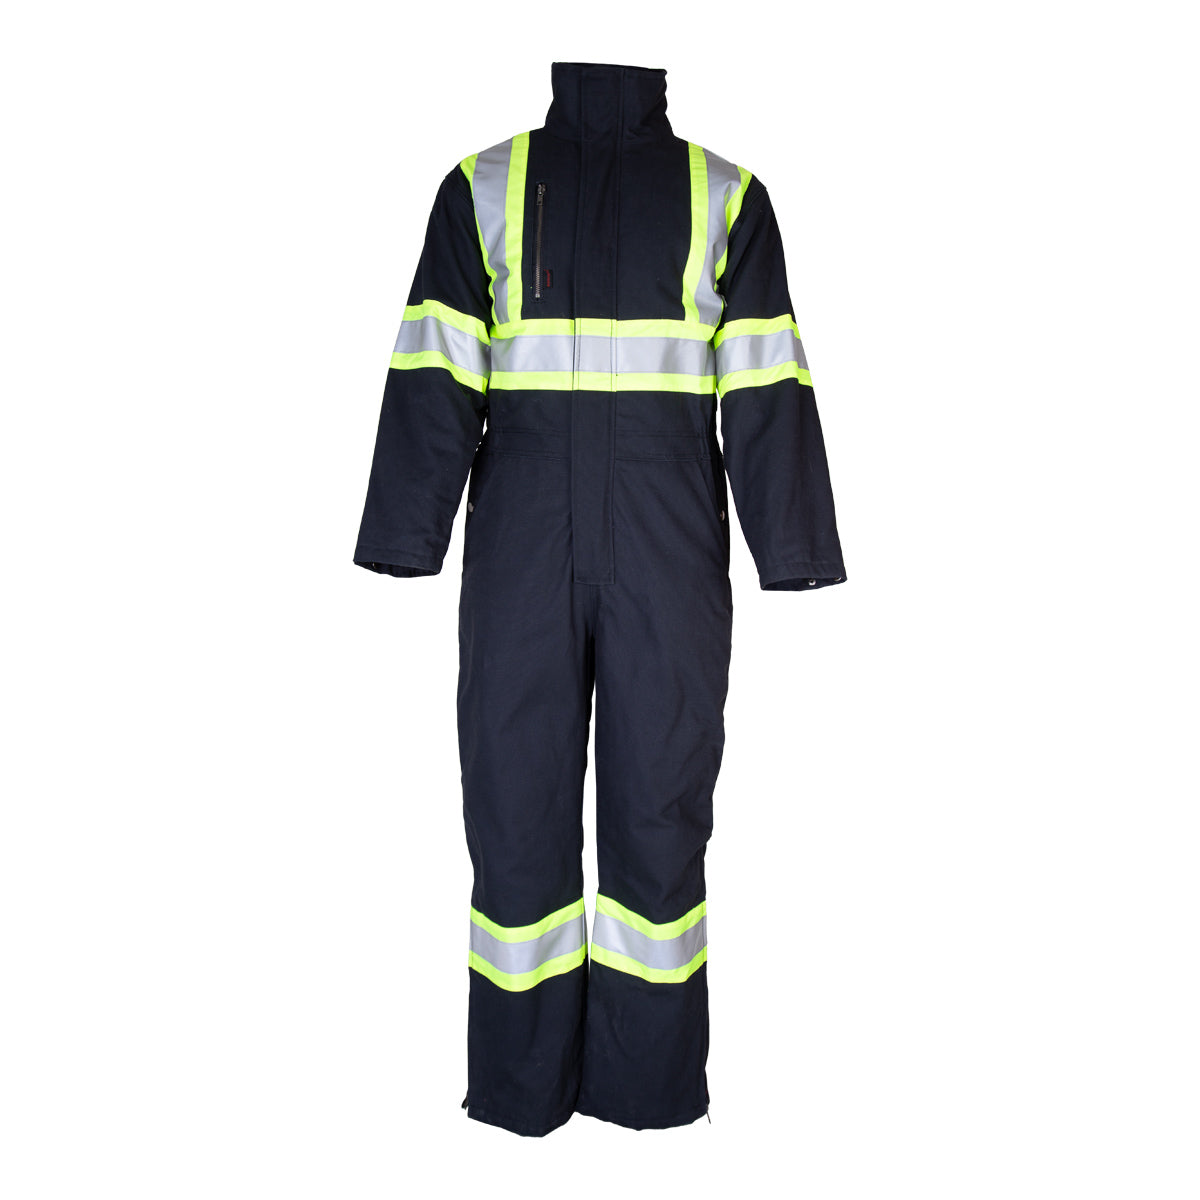 High visibility all-cotton lined coverall by Kingtreads